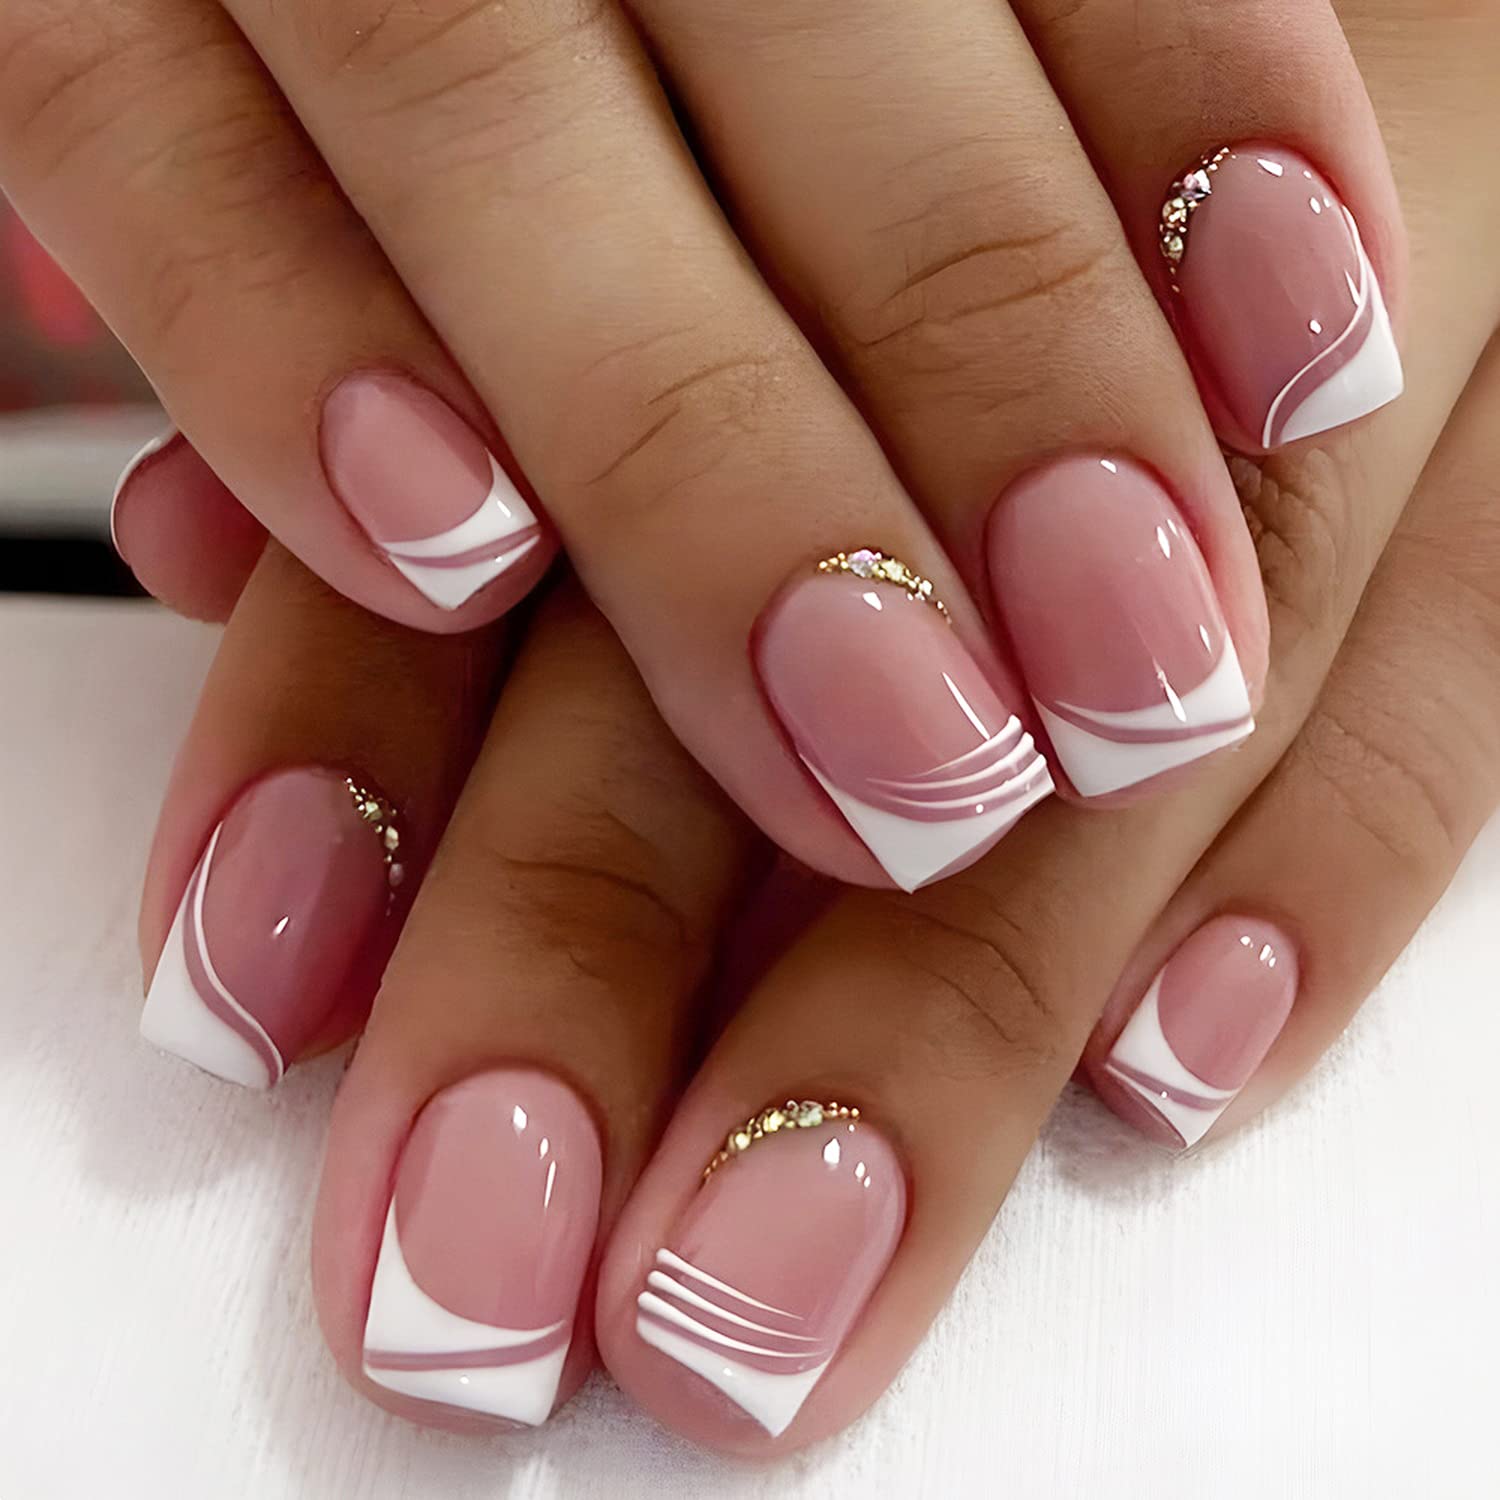 French Tip Nail Art - Cute Girls Hairstyles